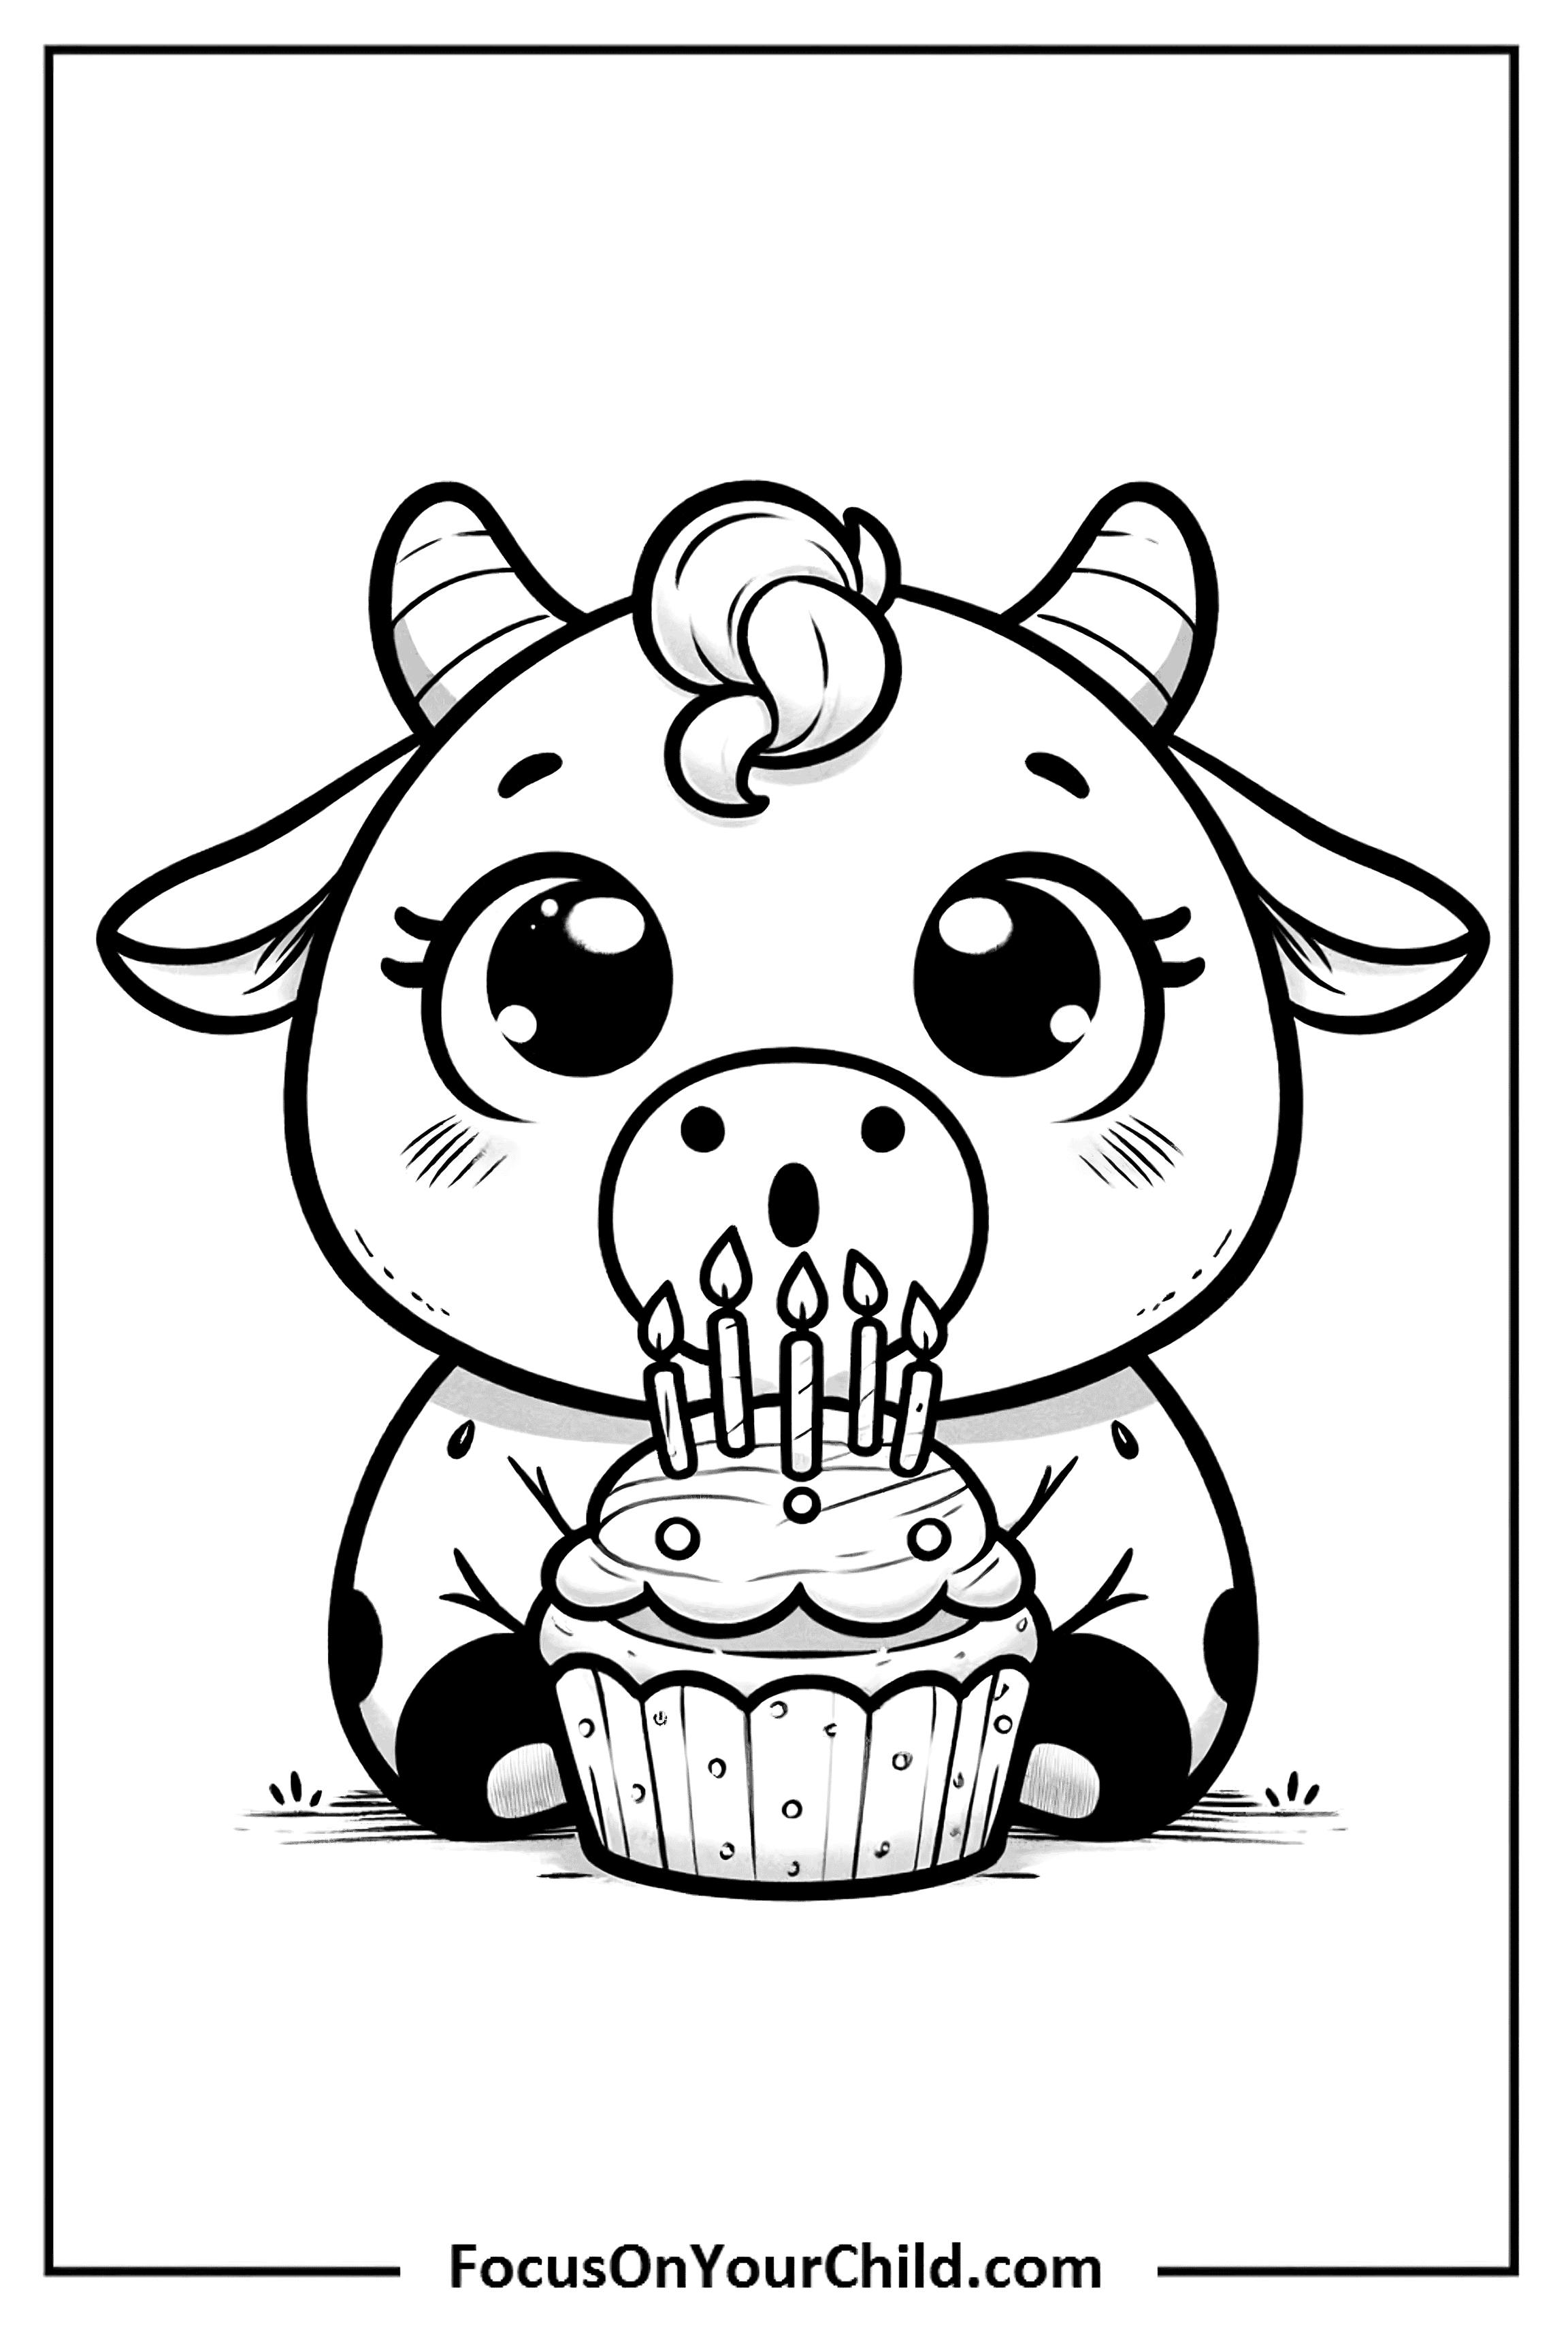 Charming cow presenting cupcake with lit candles.